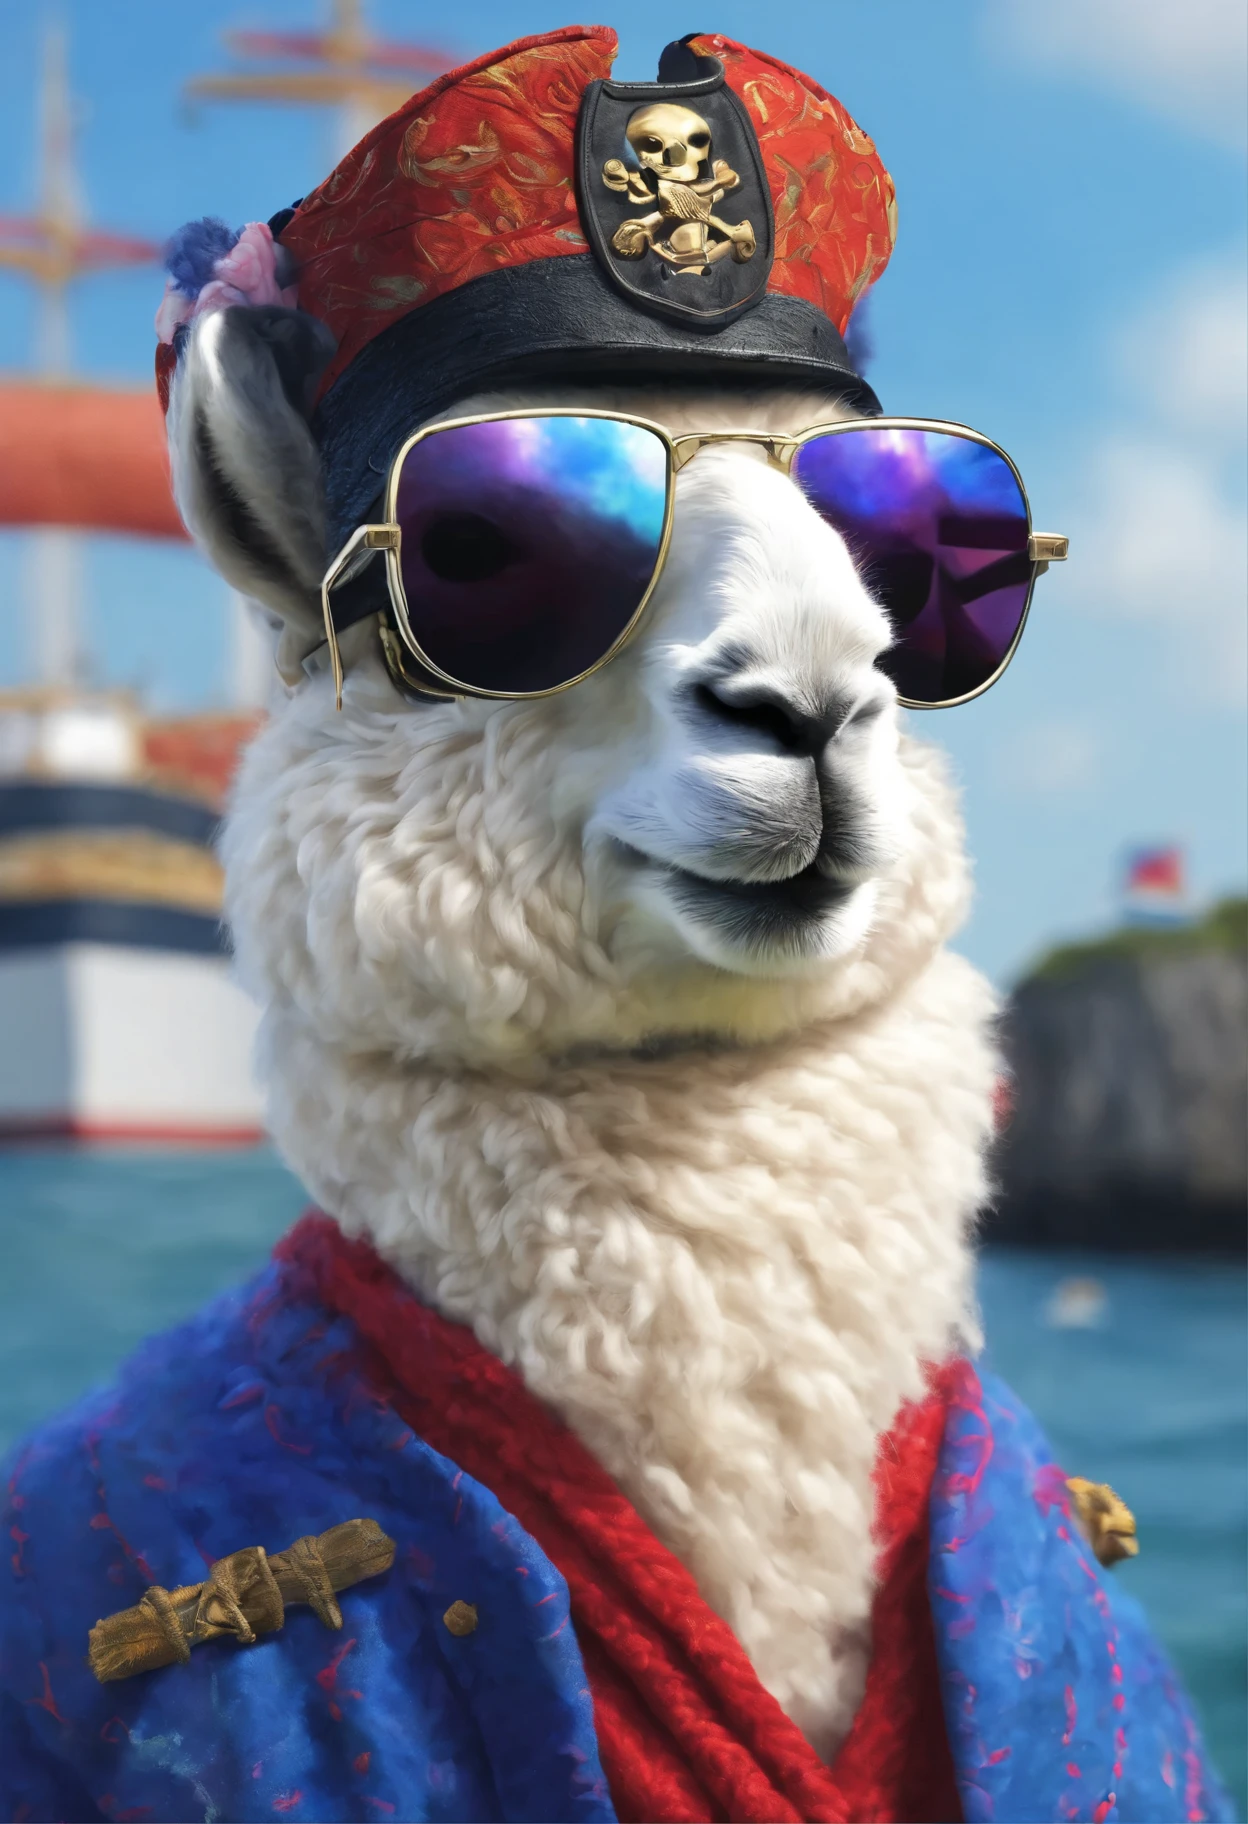 A hyperrealistic digital painting of an alpaca pirate, wearing sunglasses and bandana with a ship in the background. The style is reminiscent of Pixar's animation, with vibrant colors and detailed textures on its wool coat. It has expressive eyes that convey both curiosity and adventurous spirit.